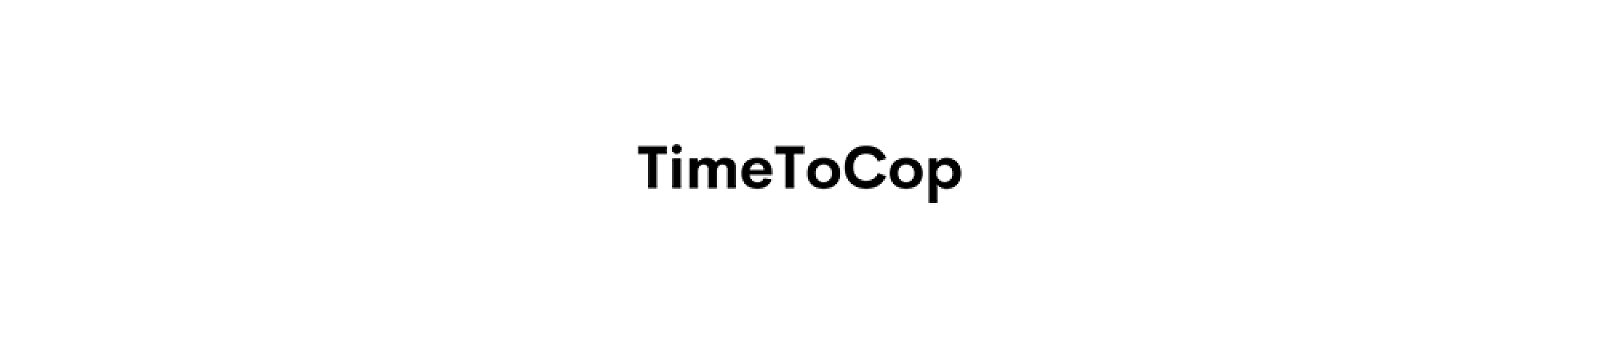 timetocop cover